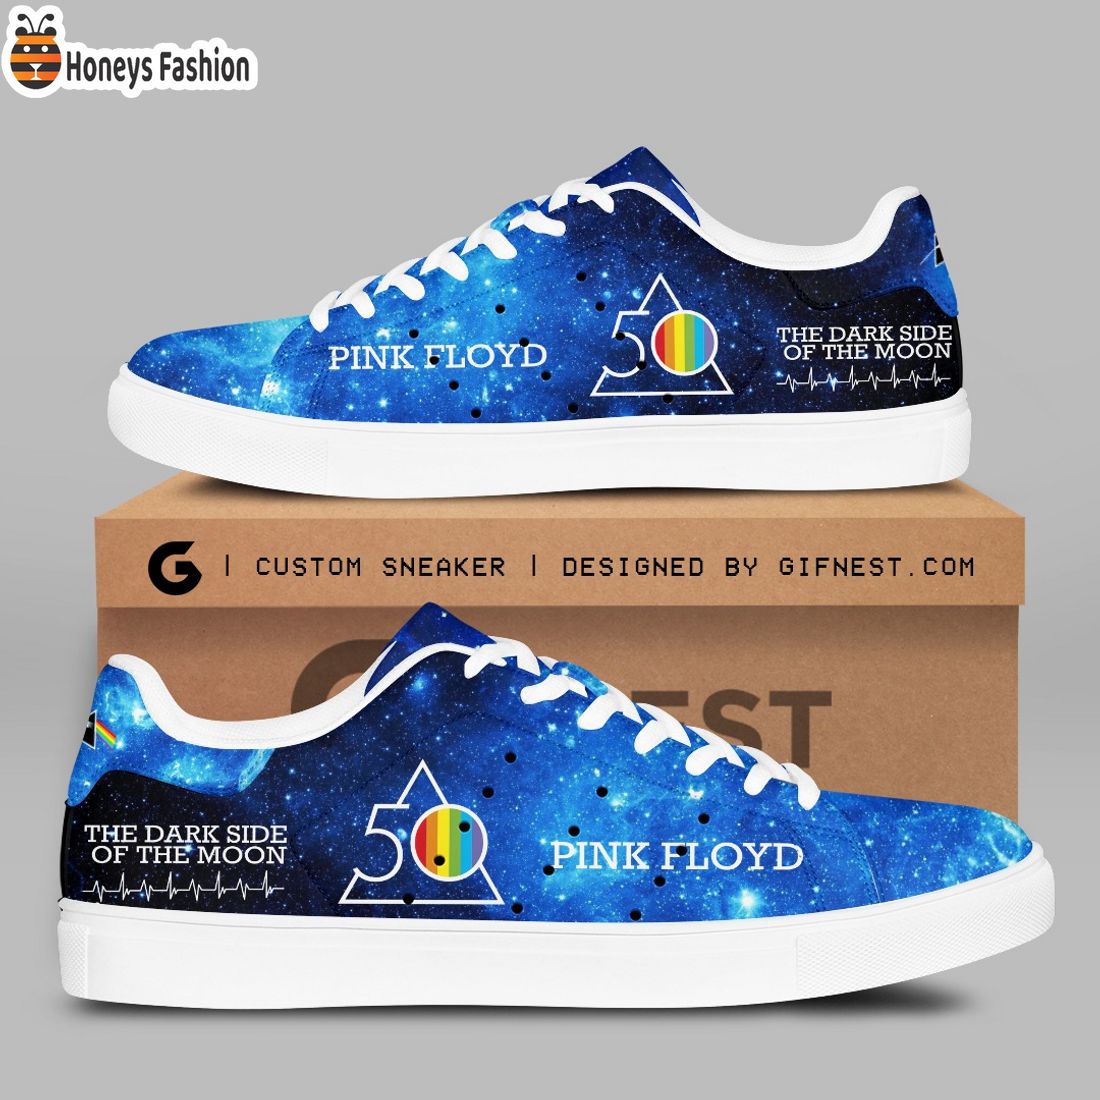 Pink Floyd The Dark Side of the Moon Stan Smith Adidas Shoes